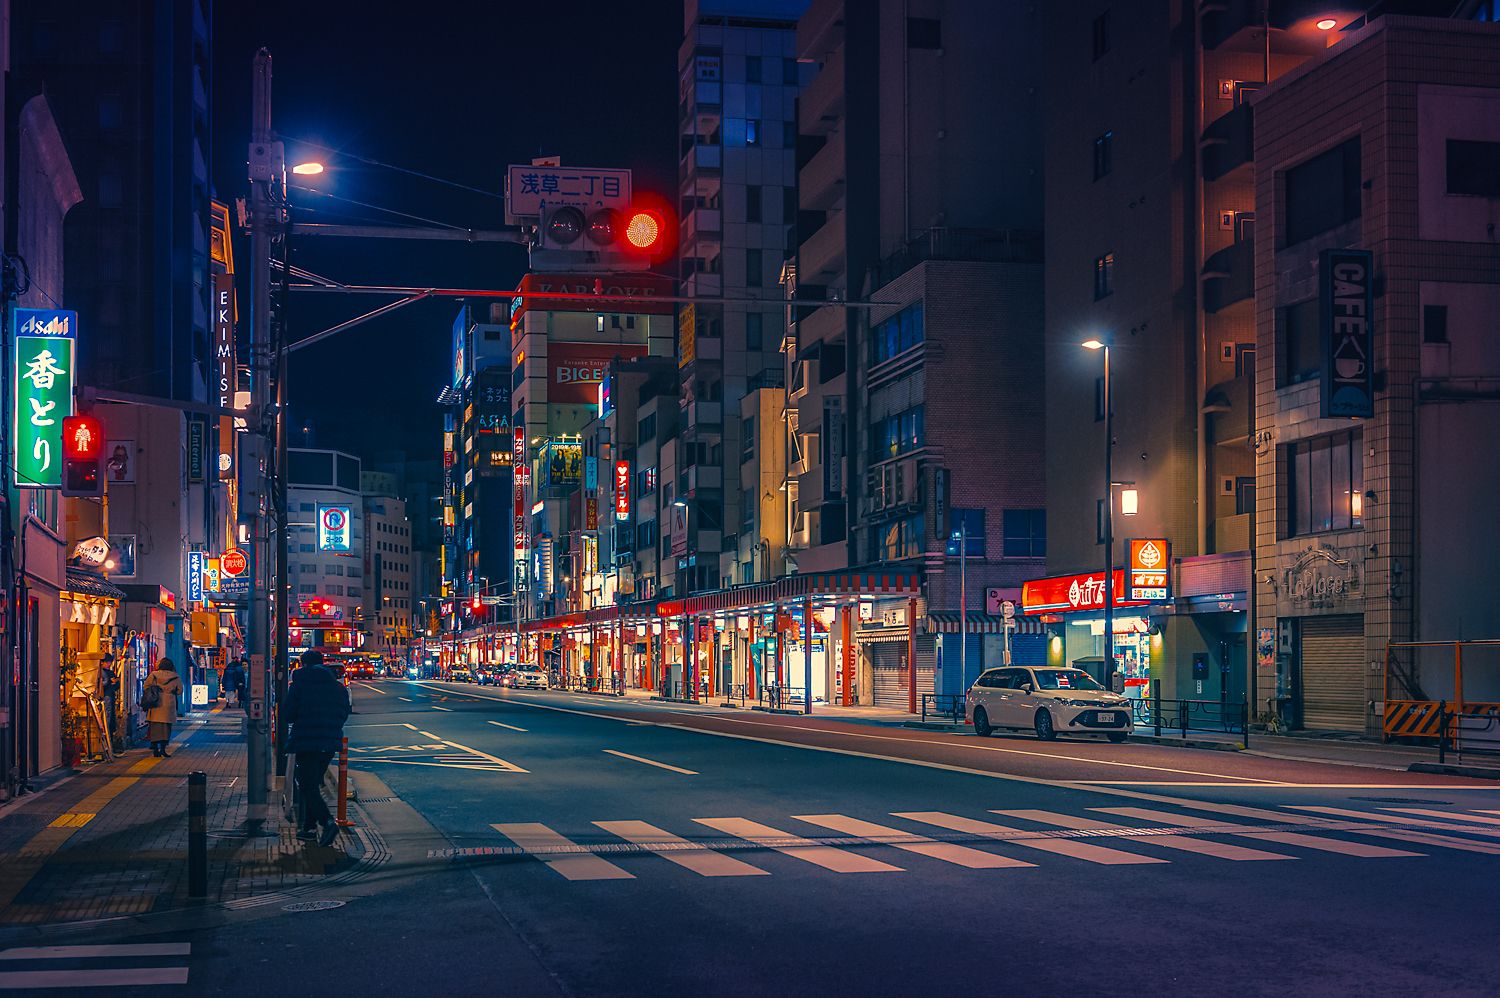 A city street at night with people walking - Tokyo